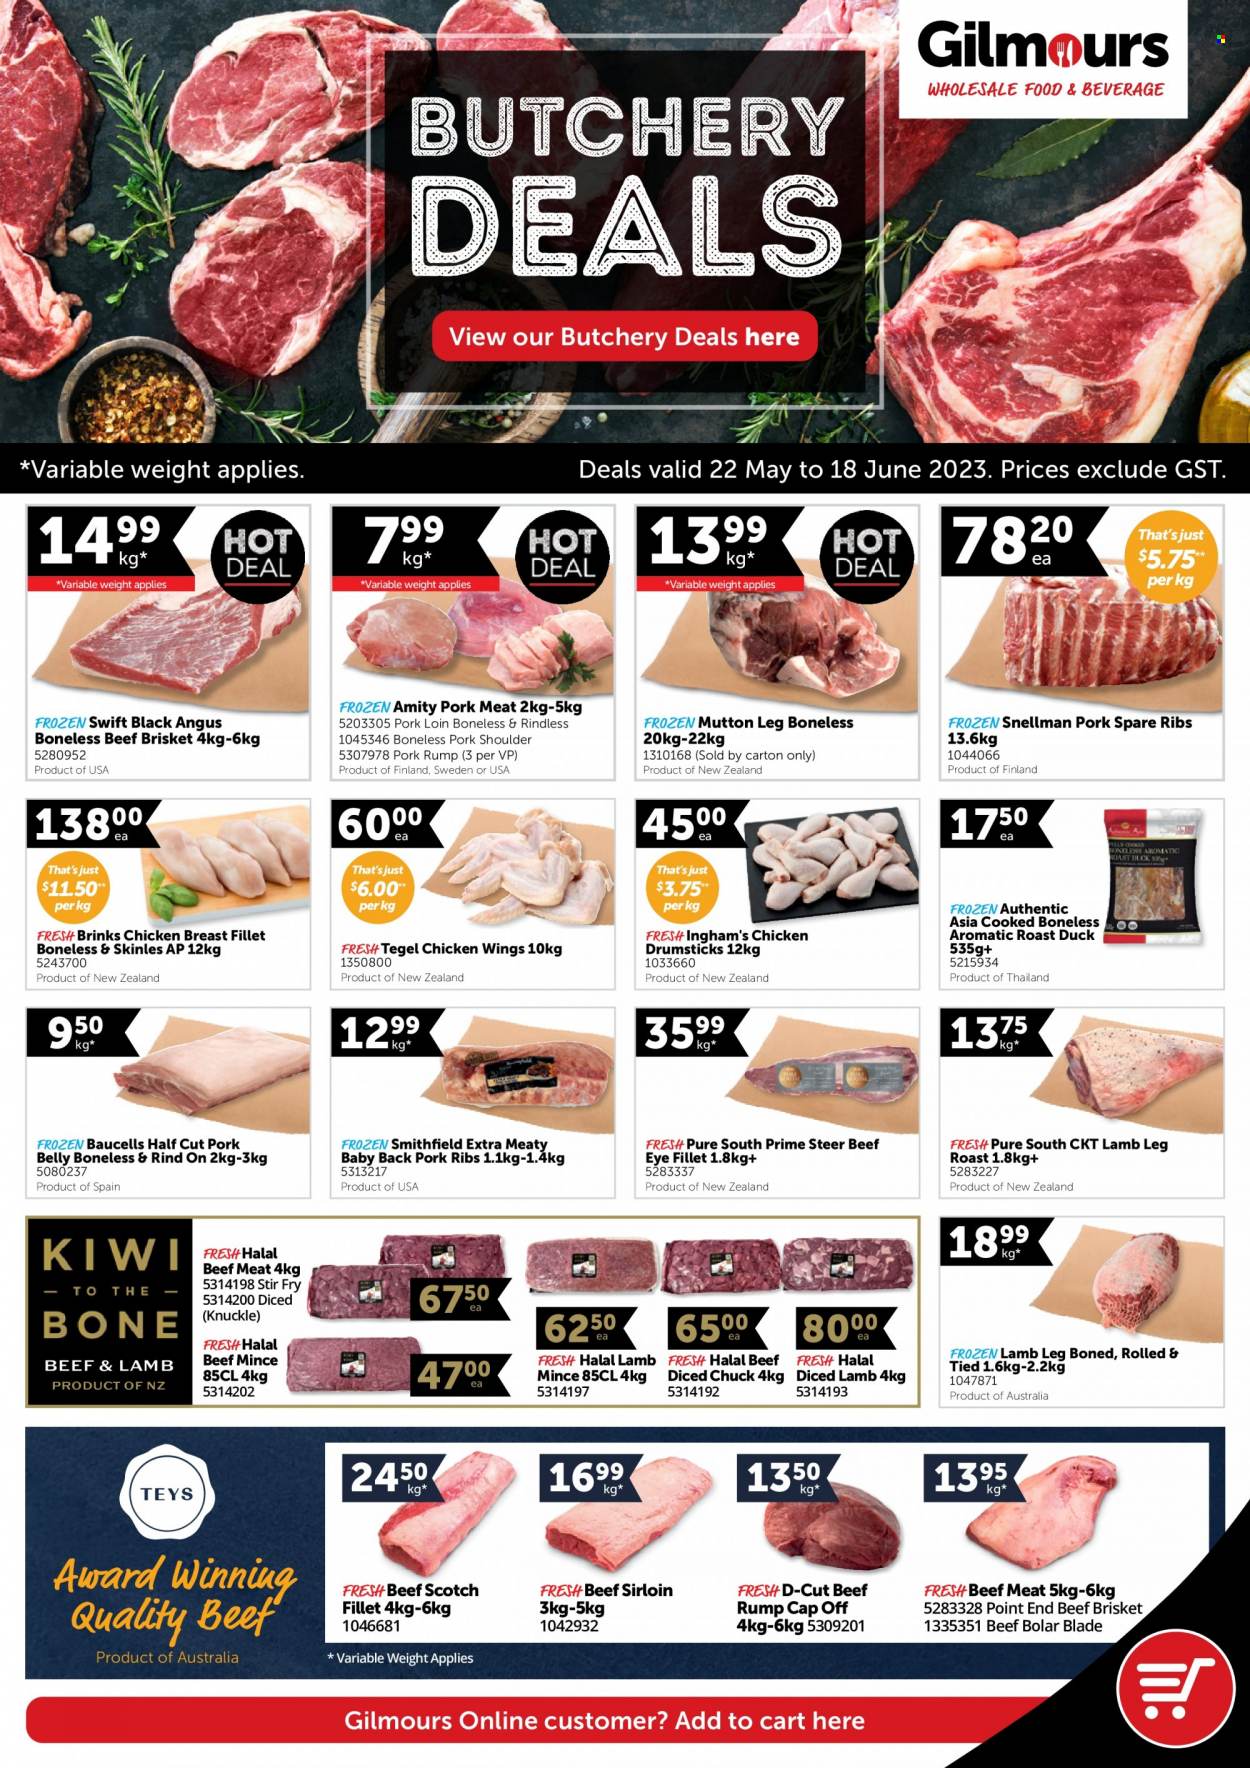 thumbnail - Gilmours mailer - 22.05.2023 - 18.06.2023 - Sales products - brisket, roast, chicken wings, chicken breasts, chicken drumsticks, chicken, beef meat, beef sirloin, ground beef, beef tenderloin, eye of round, beef brisket, ribs, pork belly, pork loin, pork meat, pork ribs, pork shoulder, pork spare ribs, pork back ribs, lamb meat, mutton meat, lamb leg. Page 1.